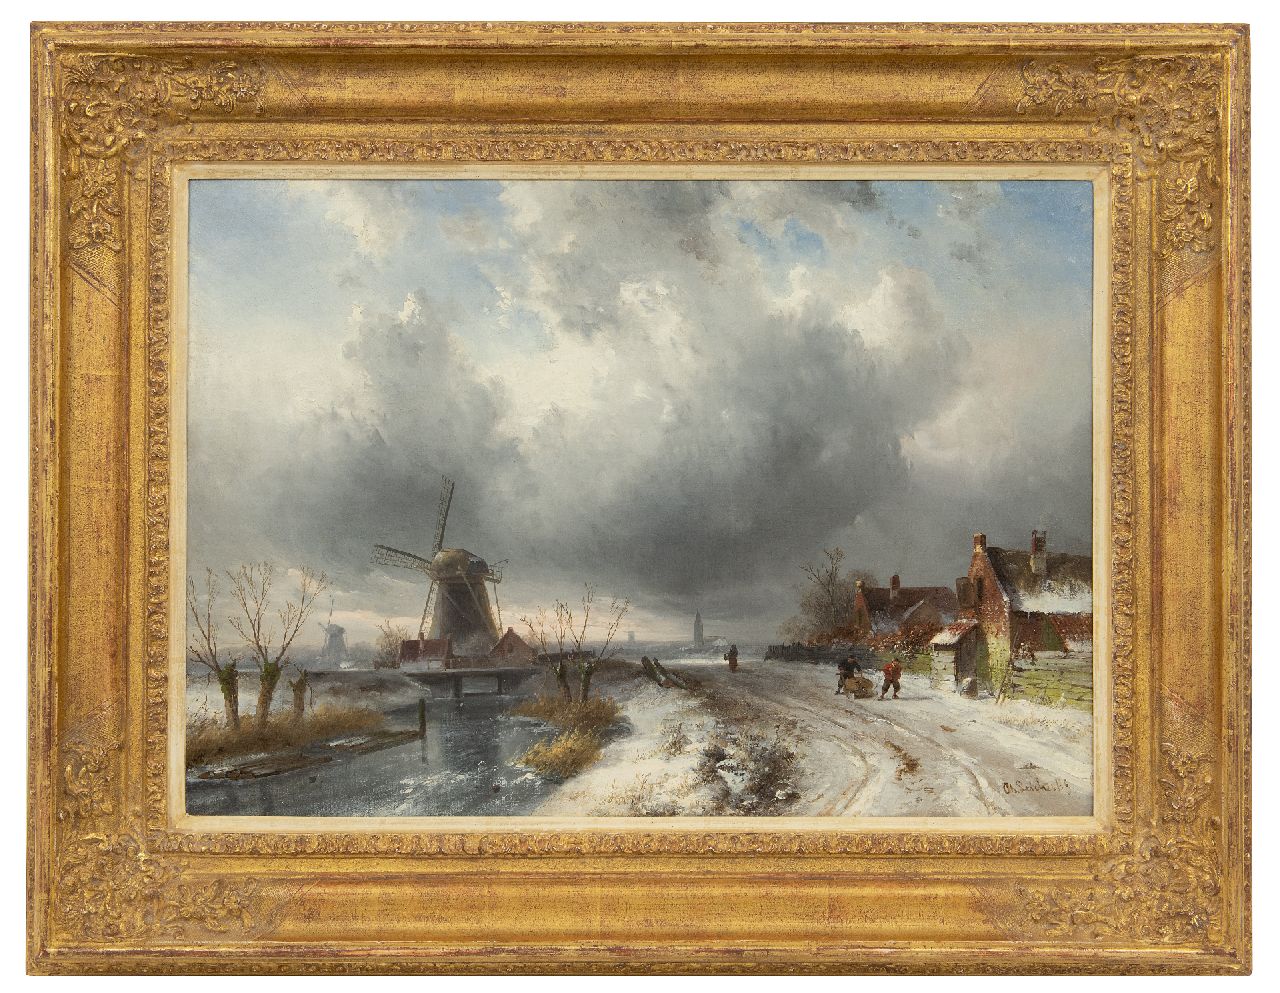 Leickert C.H.J.  | 'Charles' Henri Joseph Leickert, Extensive winter landscape with figures on a snowy path, oil on canvas 44.0 x 62.7 cm, signed l.r.